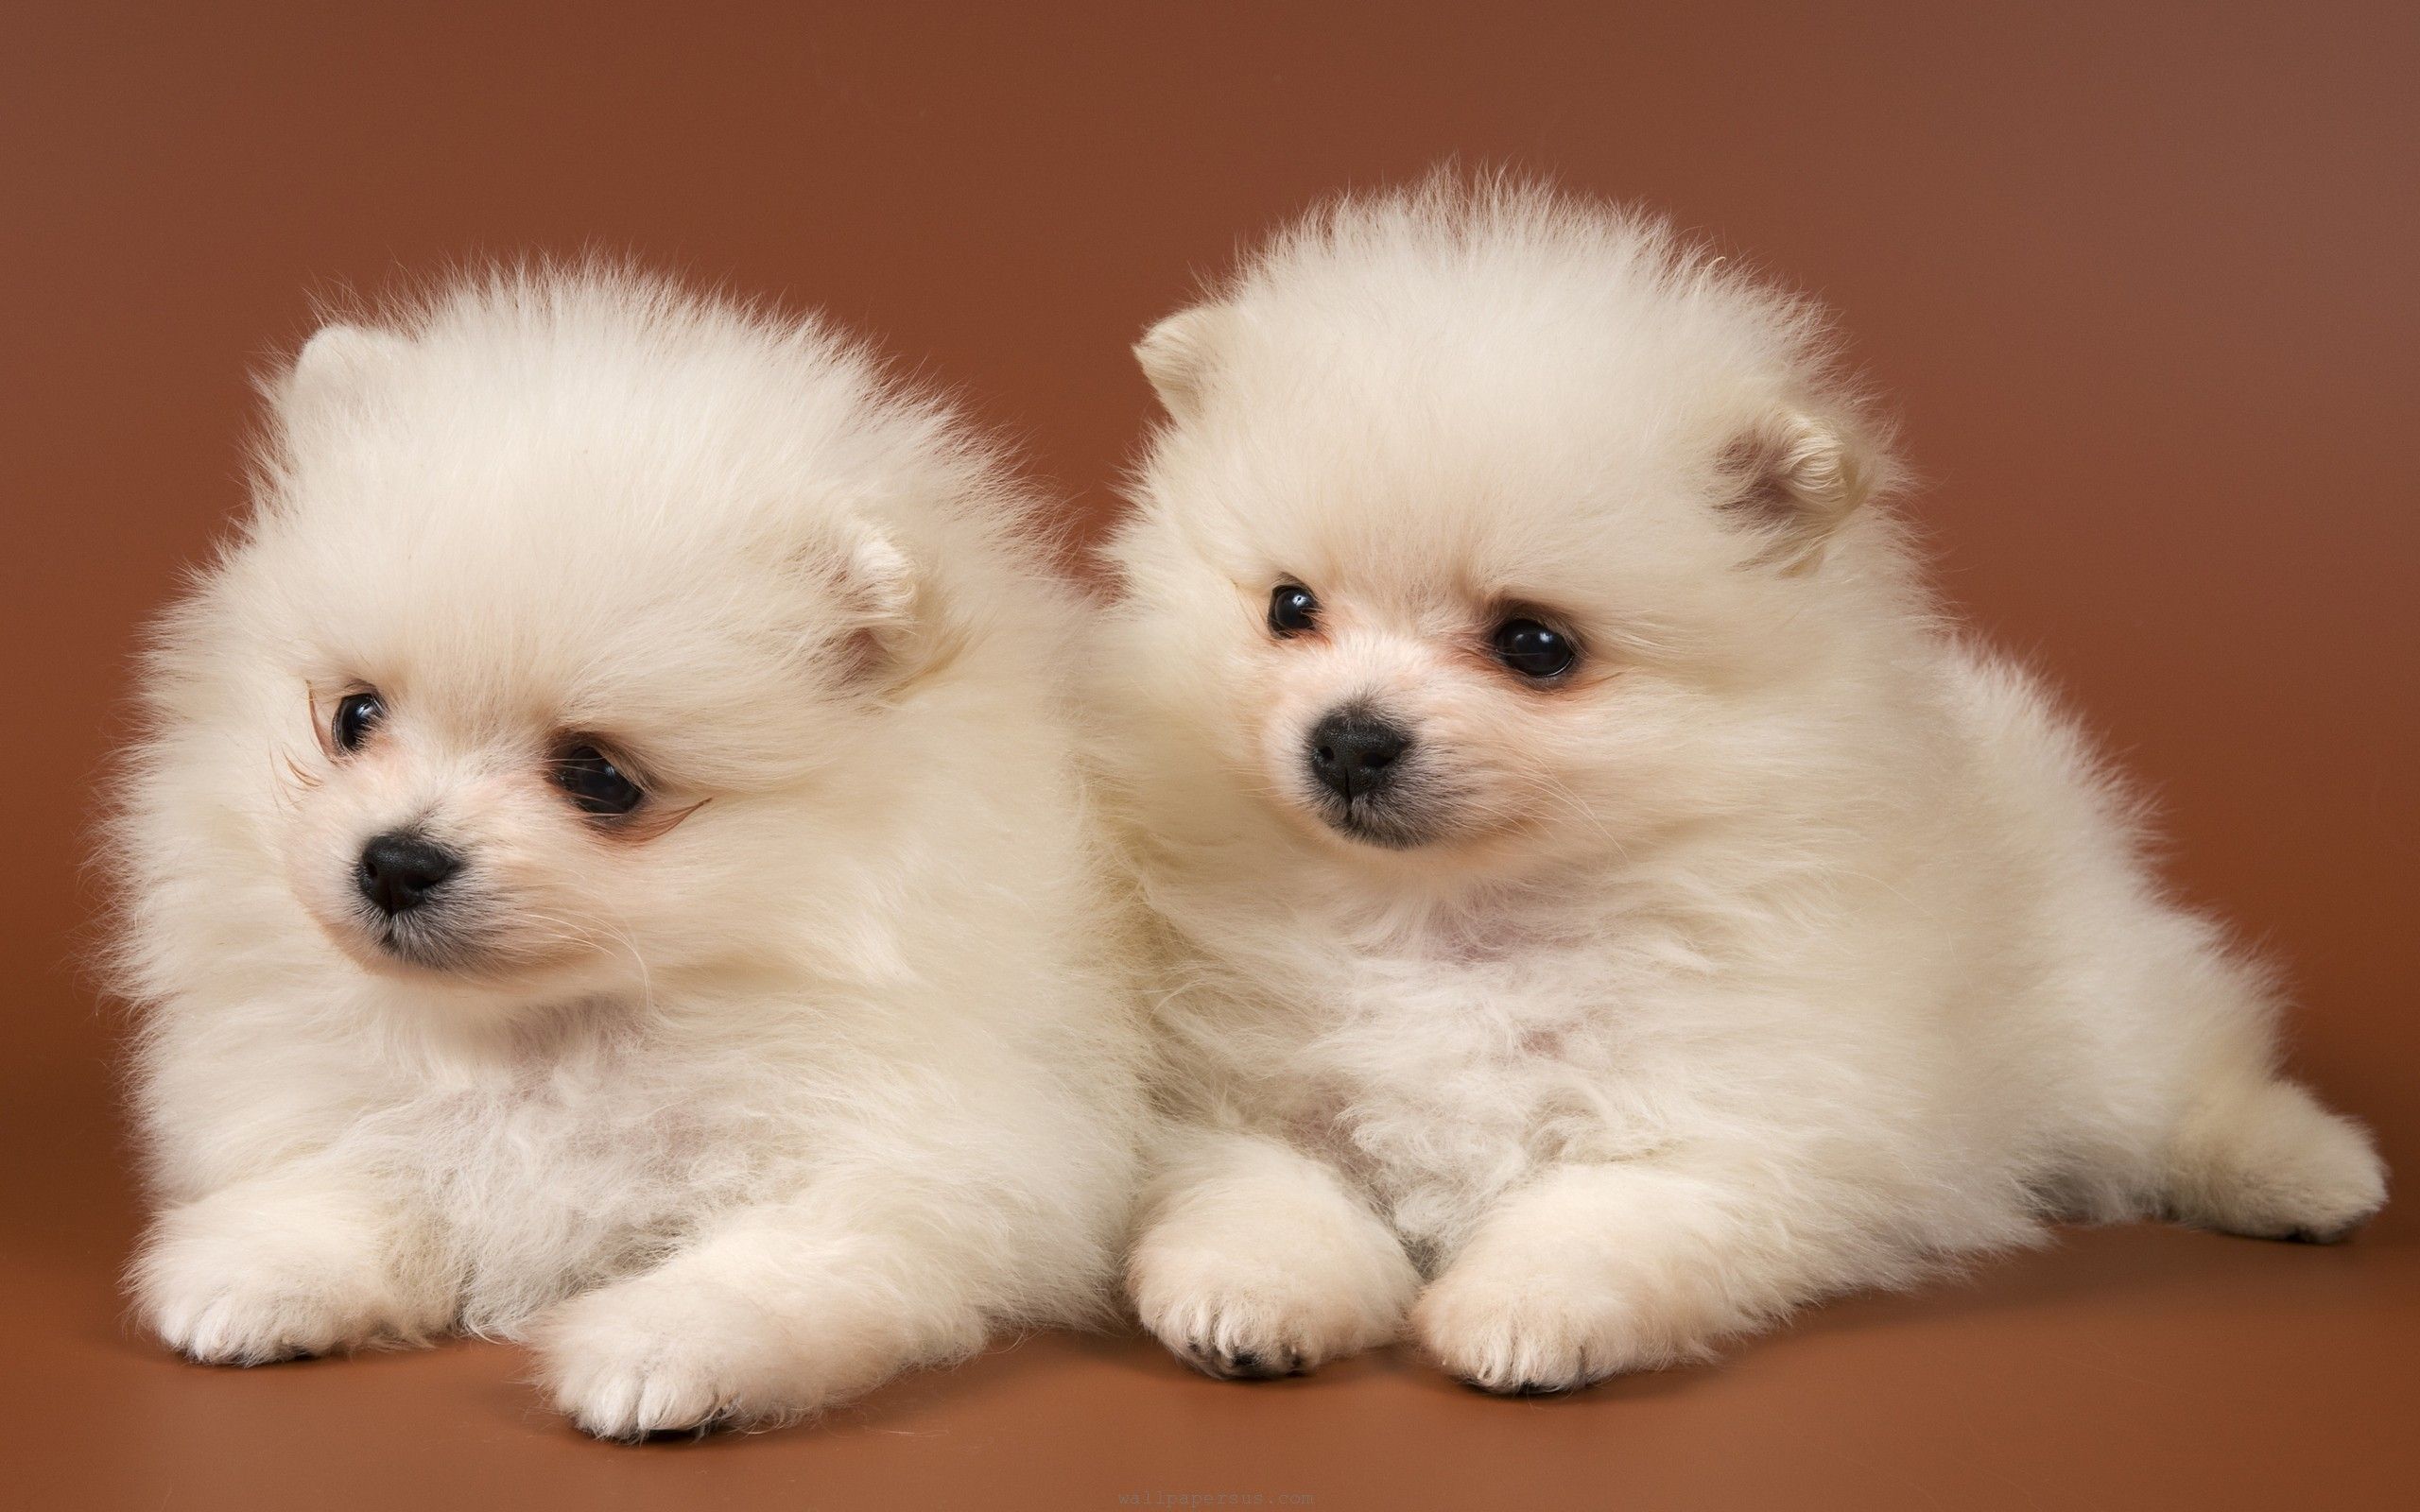 Baby Dog Wallpaper. Super cute puppies, Cute baby puppies, Cute